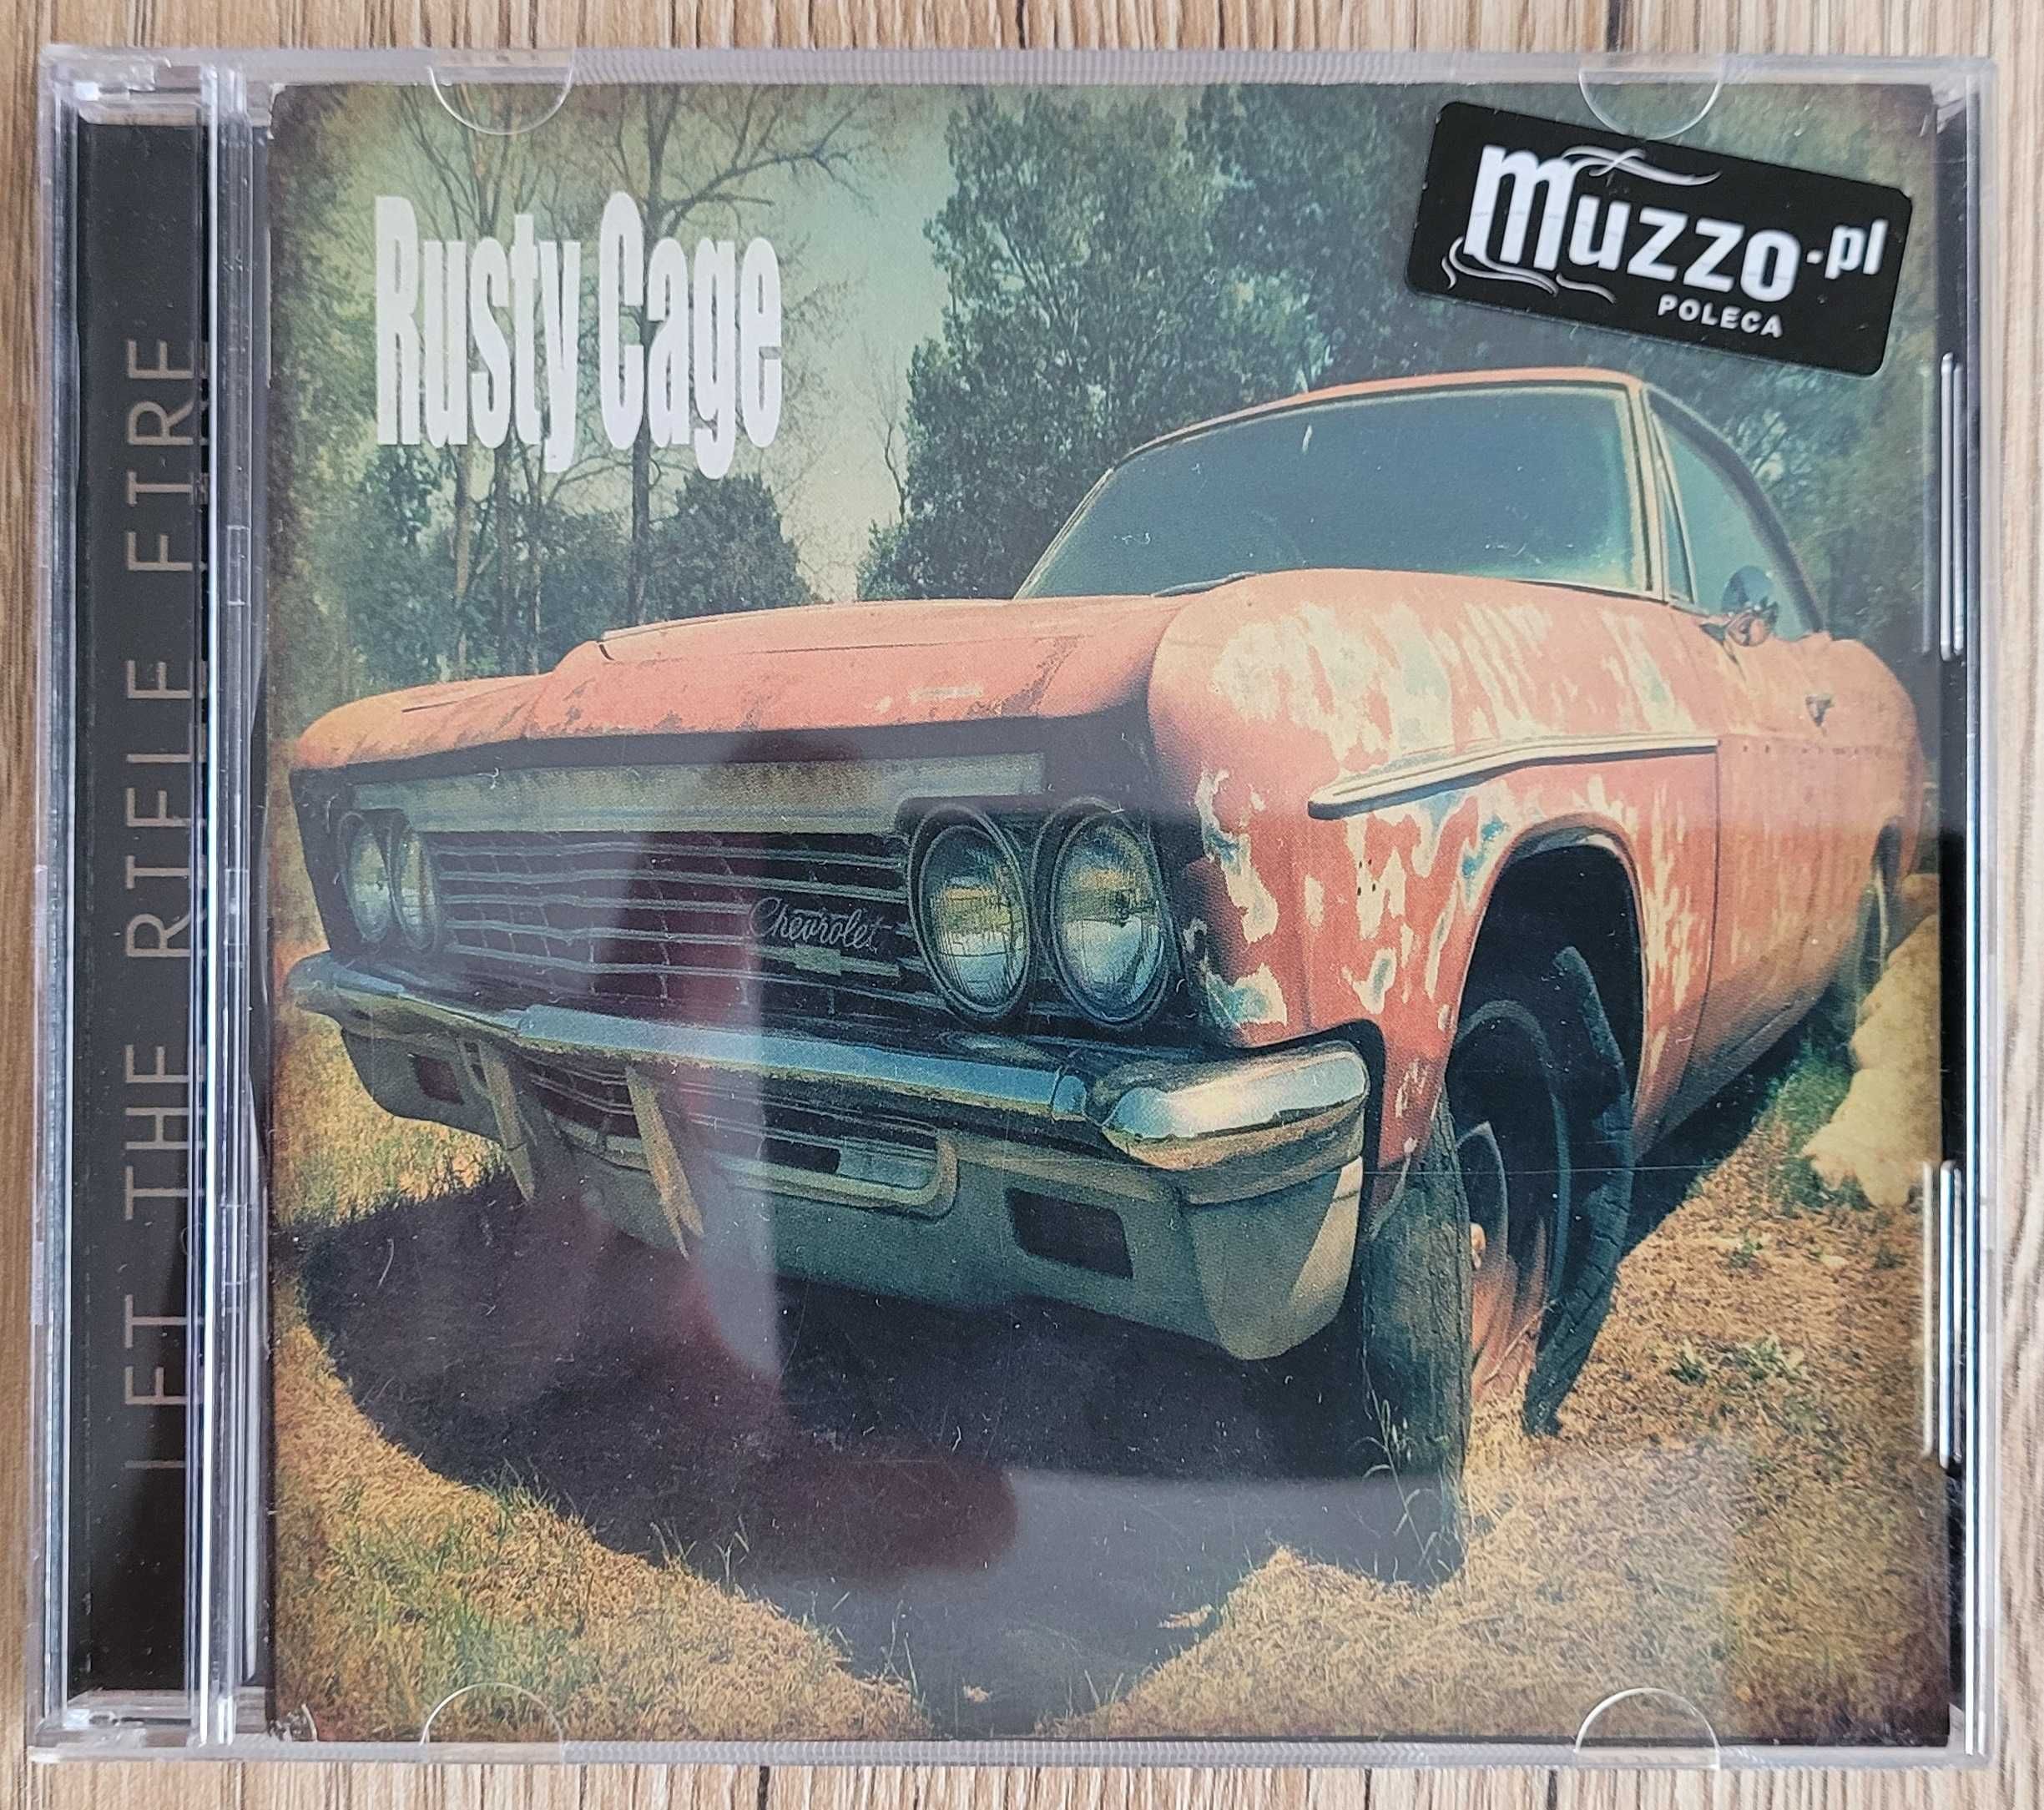 Rusty Cage - let the rifle fire - CD z autografami